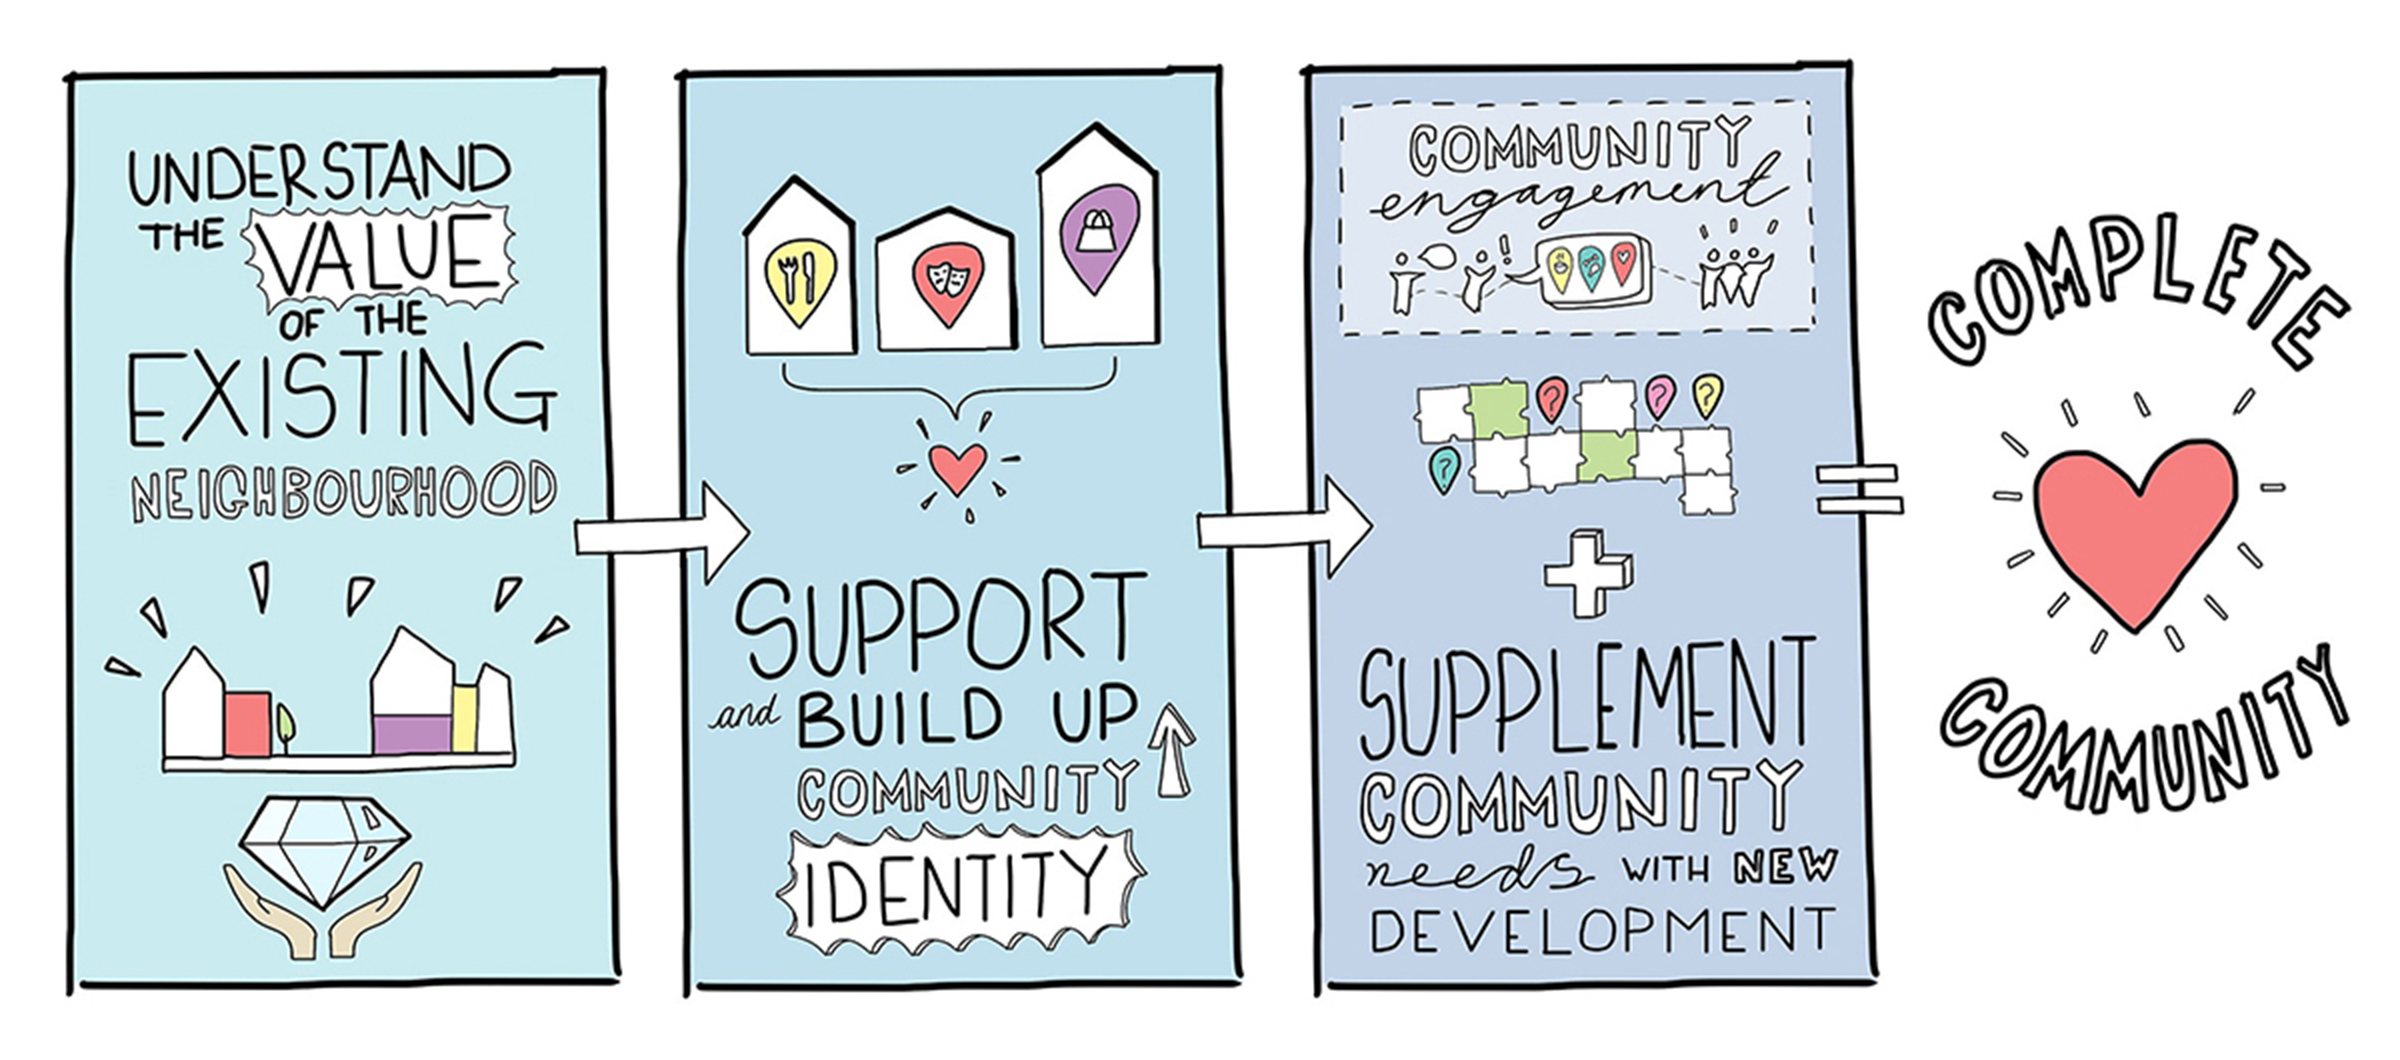 A complete community can be created through the following stages: 1. Understanding the value of the existing neighbourhood 2. Support and build up community identity 3. Engage the community and supplement community needs with new development